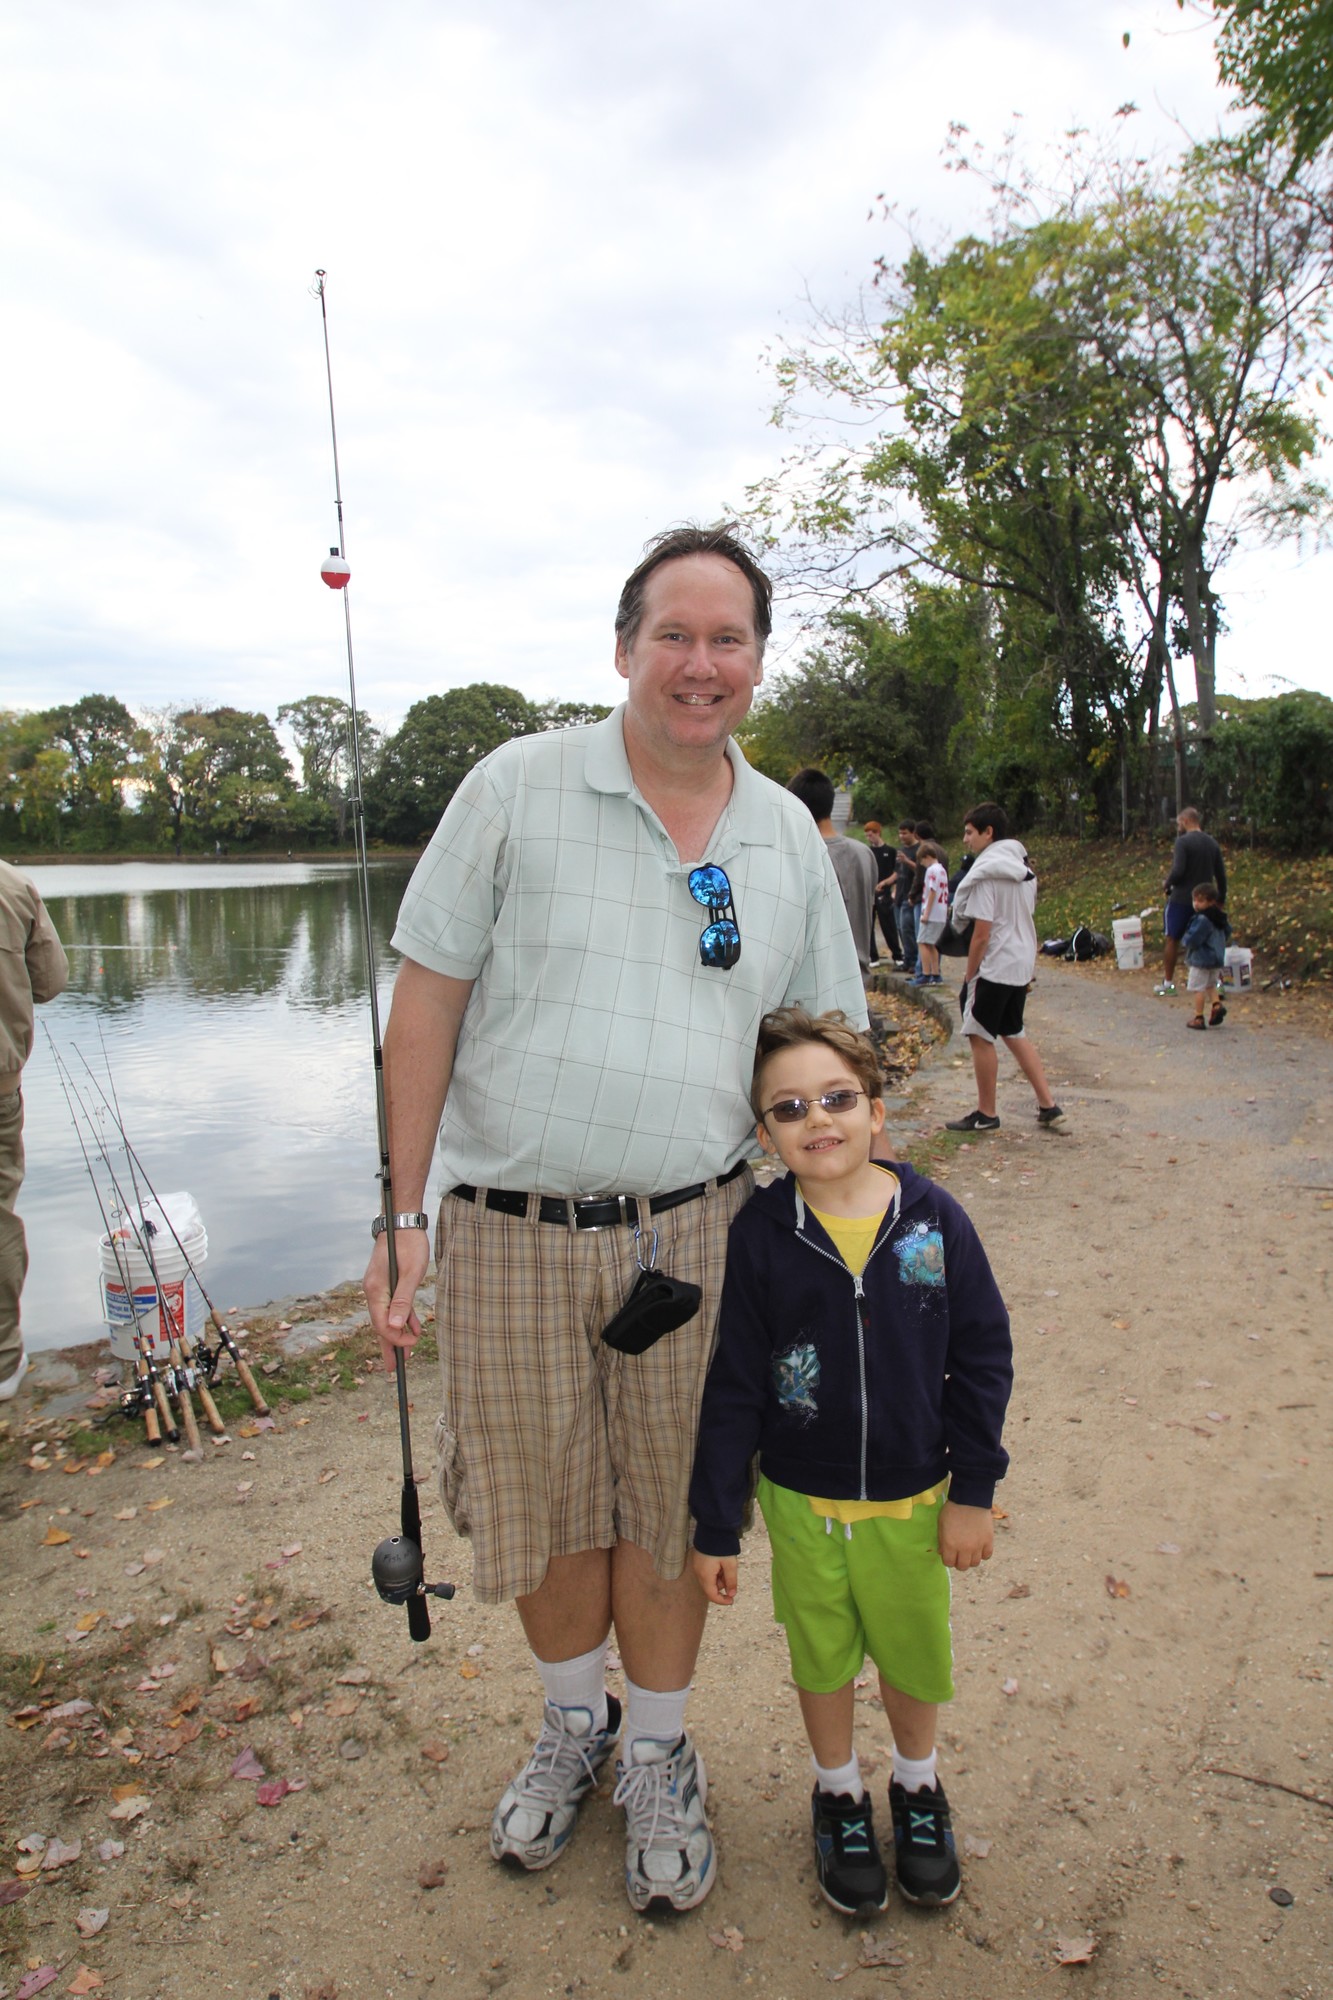 John Barkaus and his son Michael, right, spent quality time together fishing at the festival.